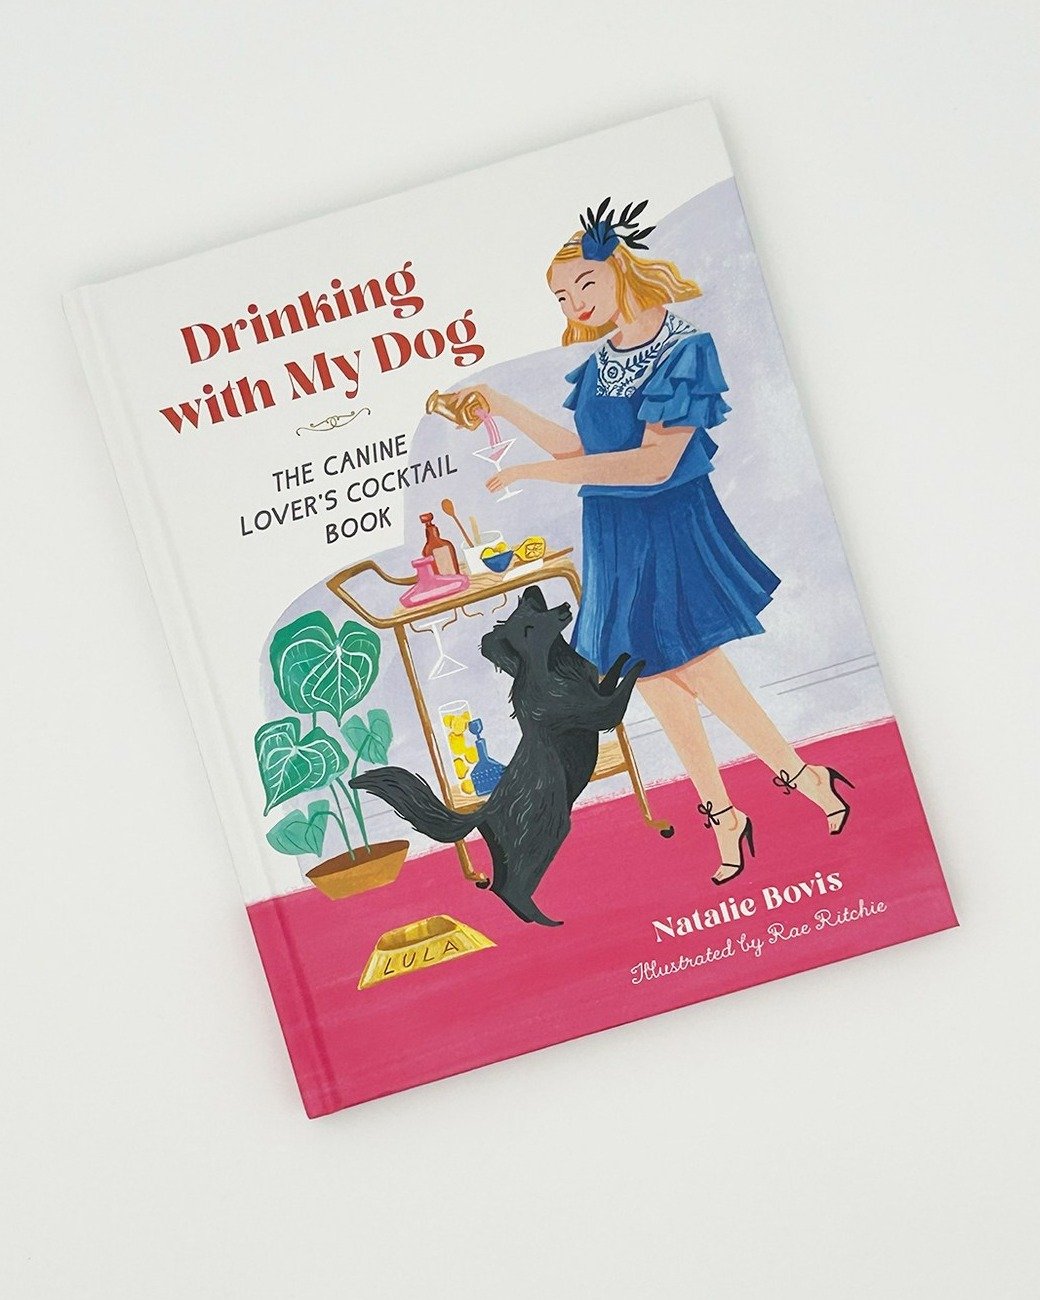 It's World Book Day! So, let's take a moment to highlight another amazing book illustrated by one of our wonderful artists, @rae.ritchie! A cocktail recipe book for dog lovers everywhere 🍸🐶

 #surfacedesign #artlicensing #tippitytopbestestartever #